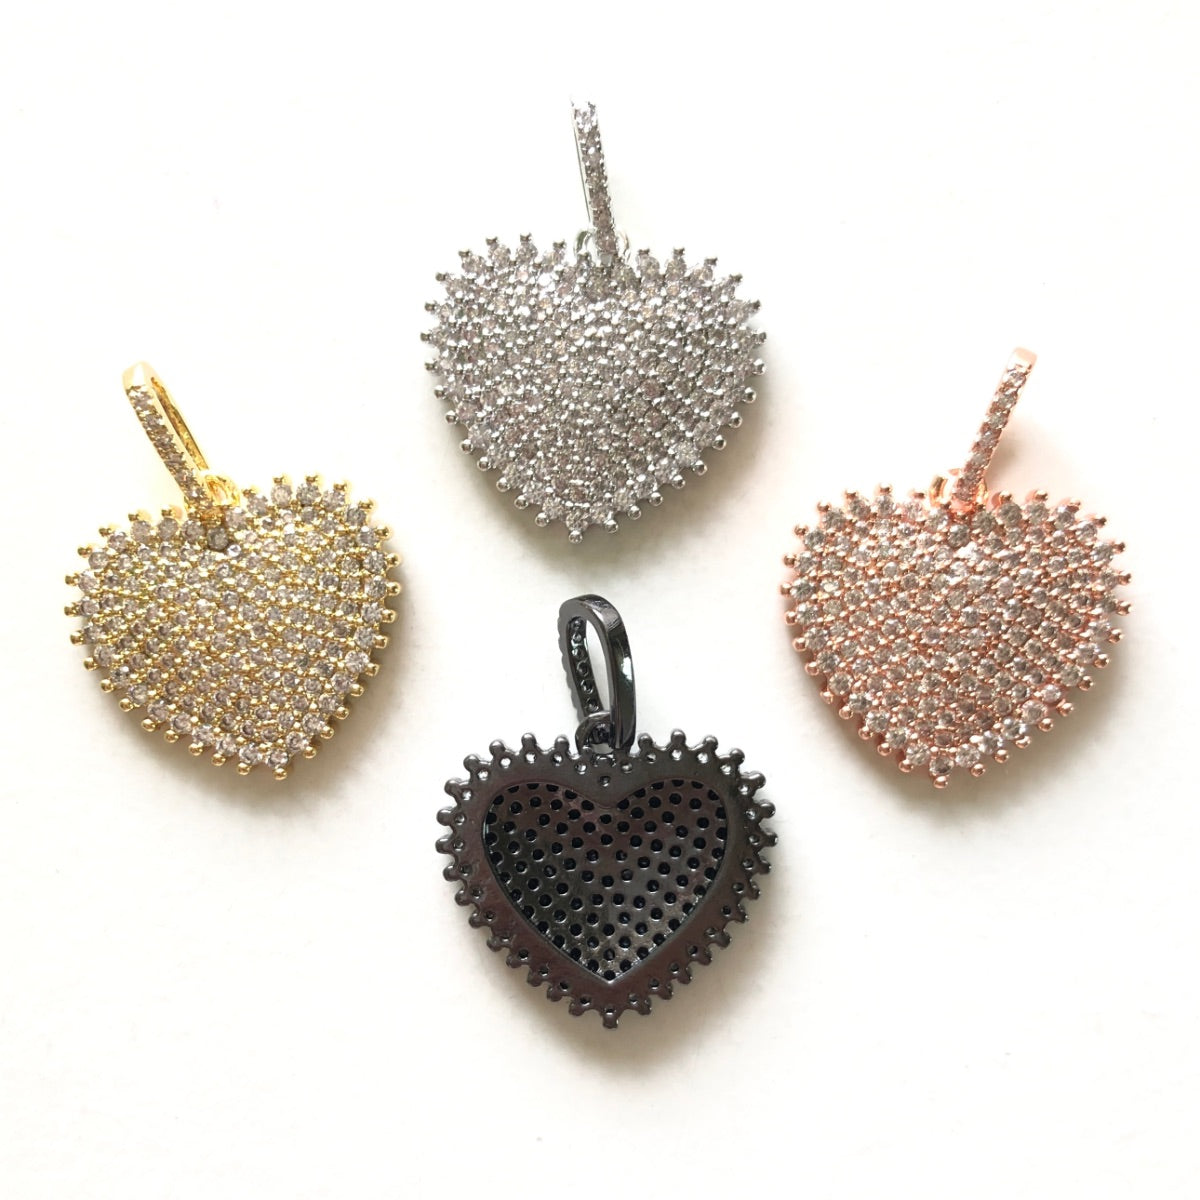 10pcs/lot CZ Paved Heart Charm Pendants CZ Paved Charms Hearts New Charms Arrivals Charms Beads Beyond